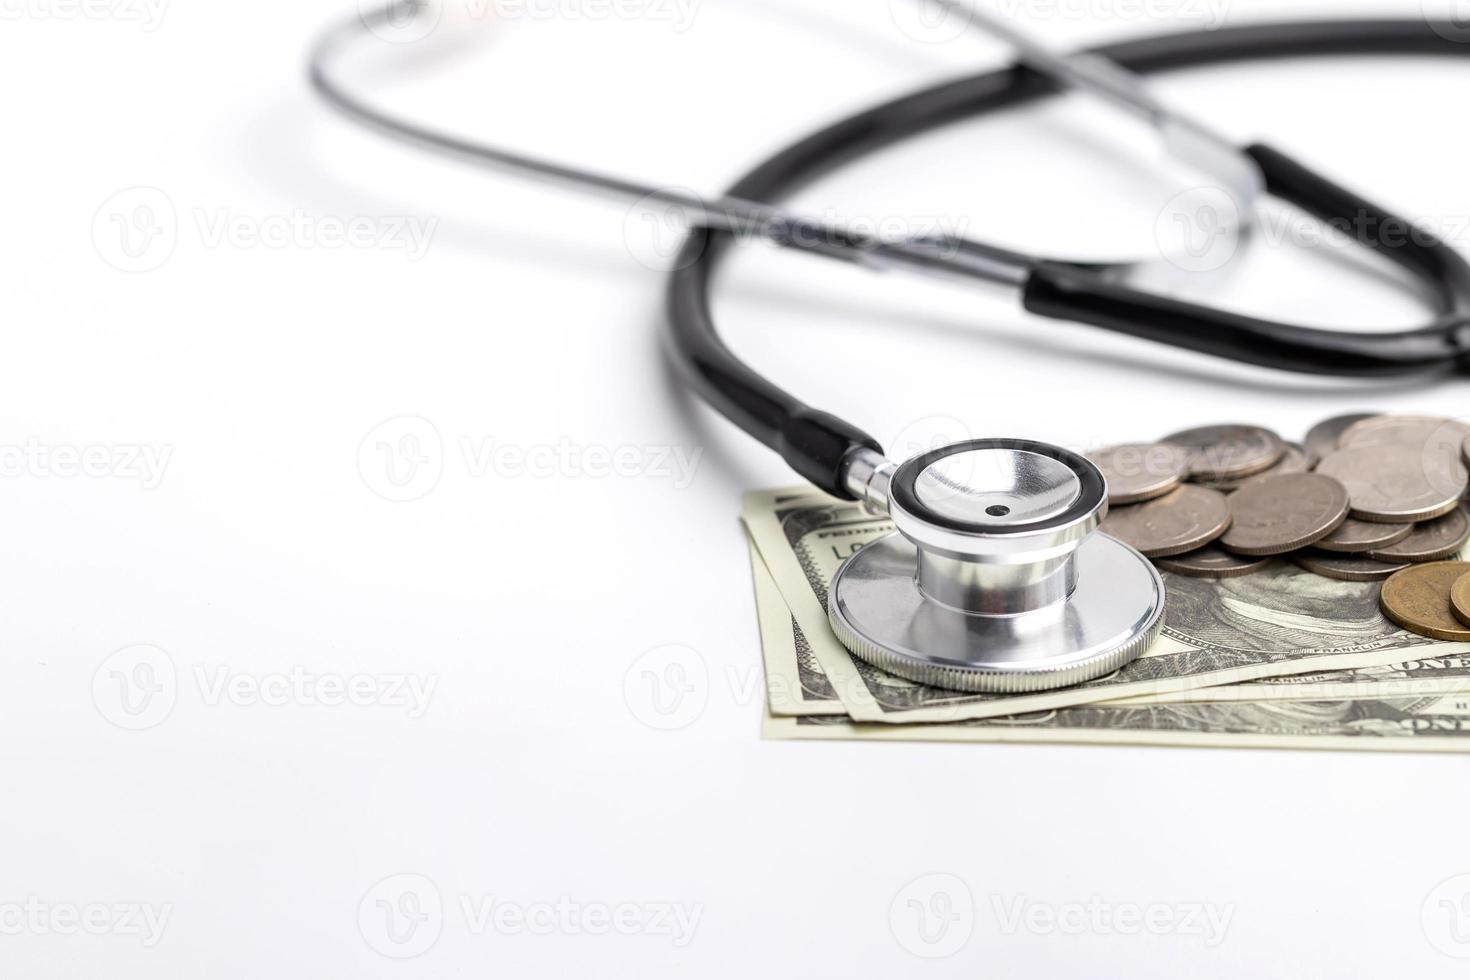 a stethoscope placed on banknotes with coins. photo